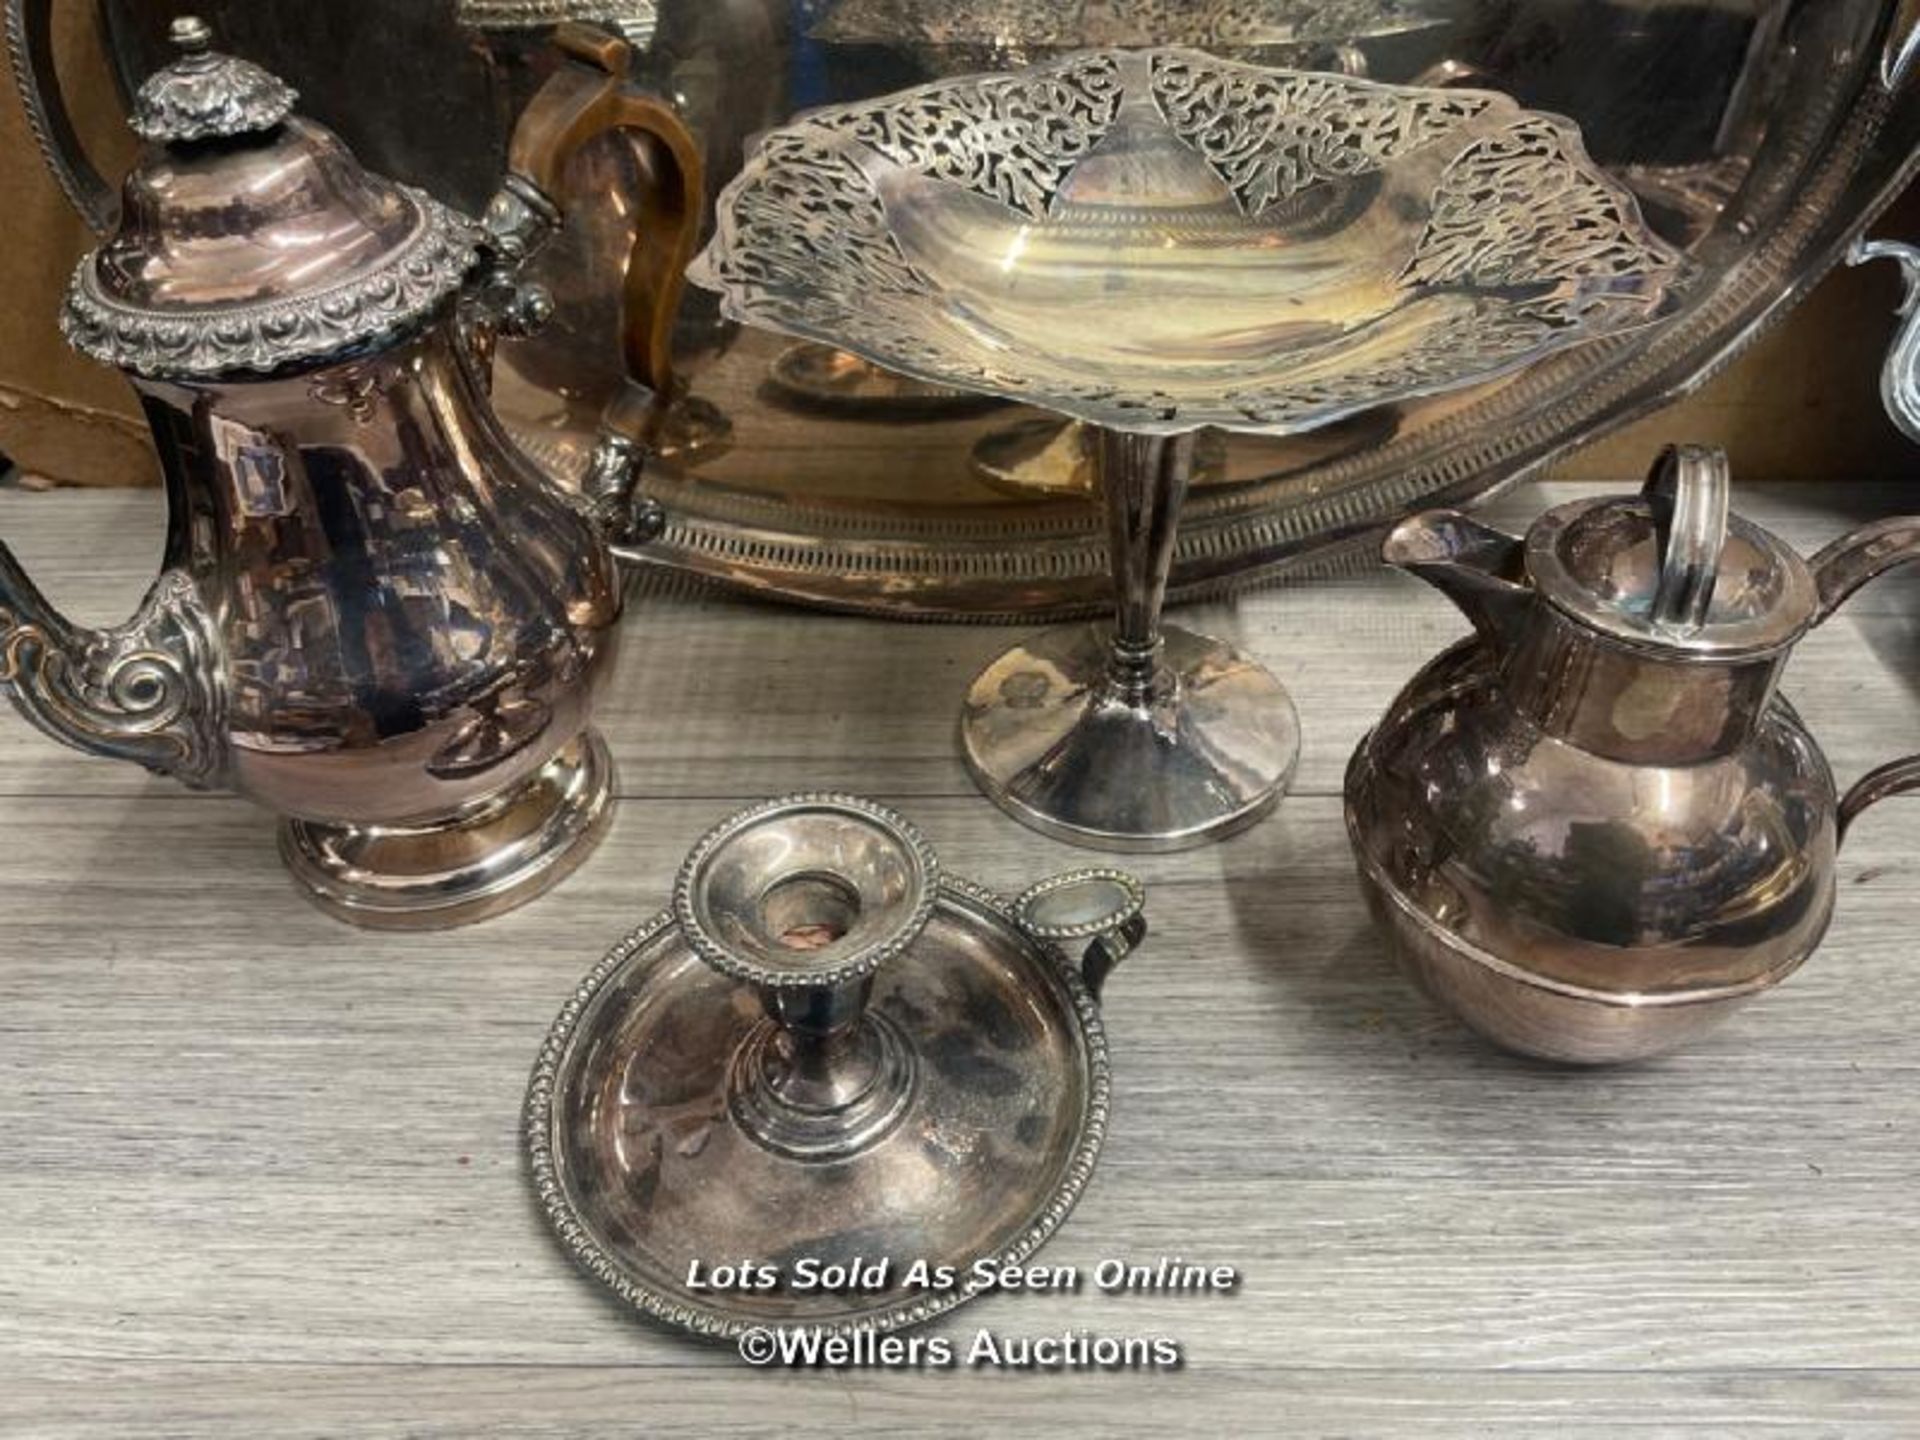 A LARGE QUANTITY OF ANTIQUE METAL WARE INCLUDING TRAYS, LARGE SERVING DISH, COFFE & TEA POTS AND - Image 7 of 8